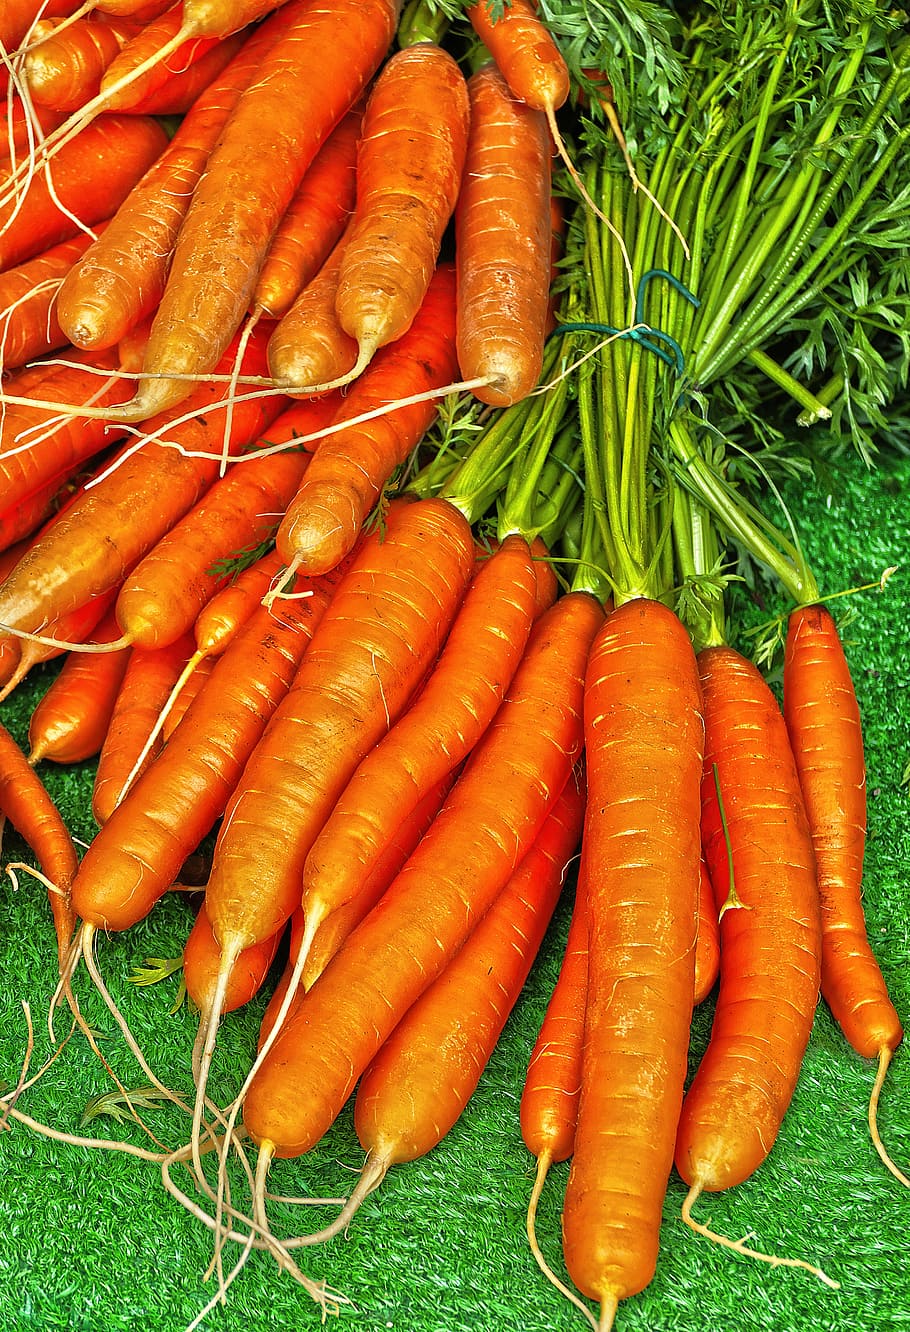 Carrot Wallpaper Vector Images over 4100